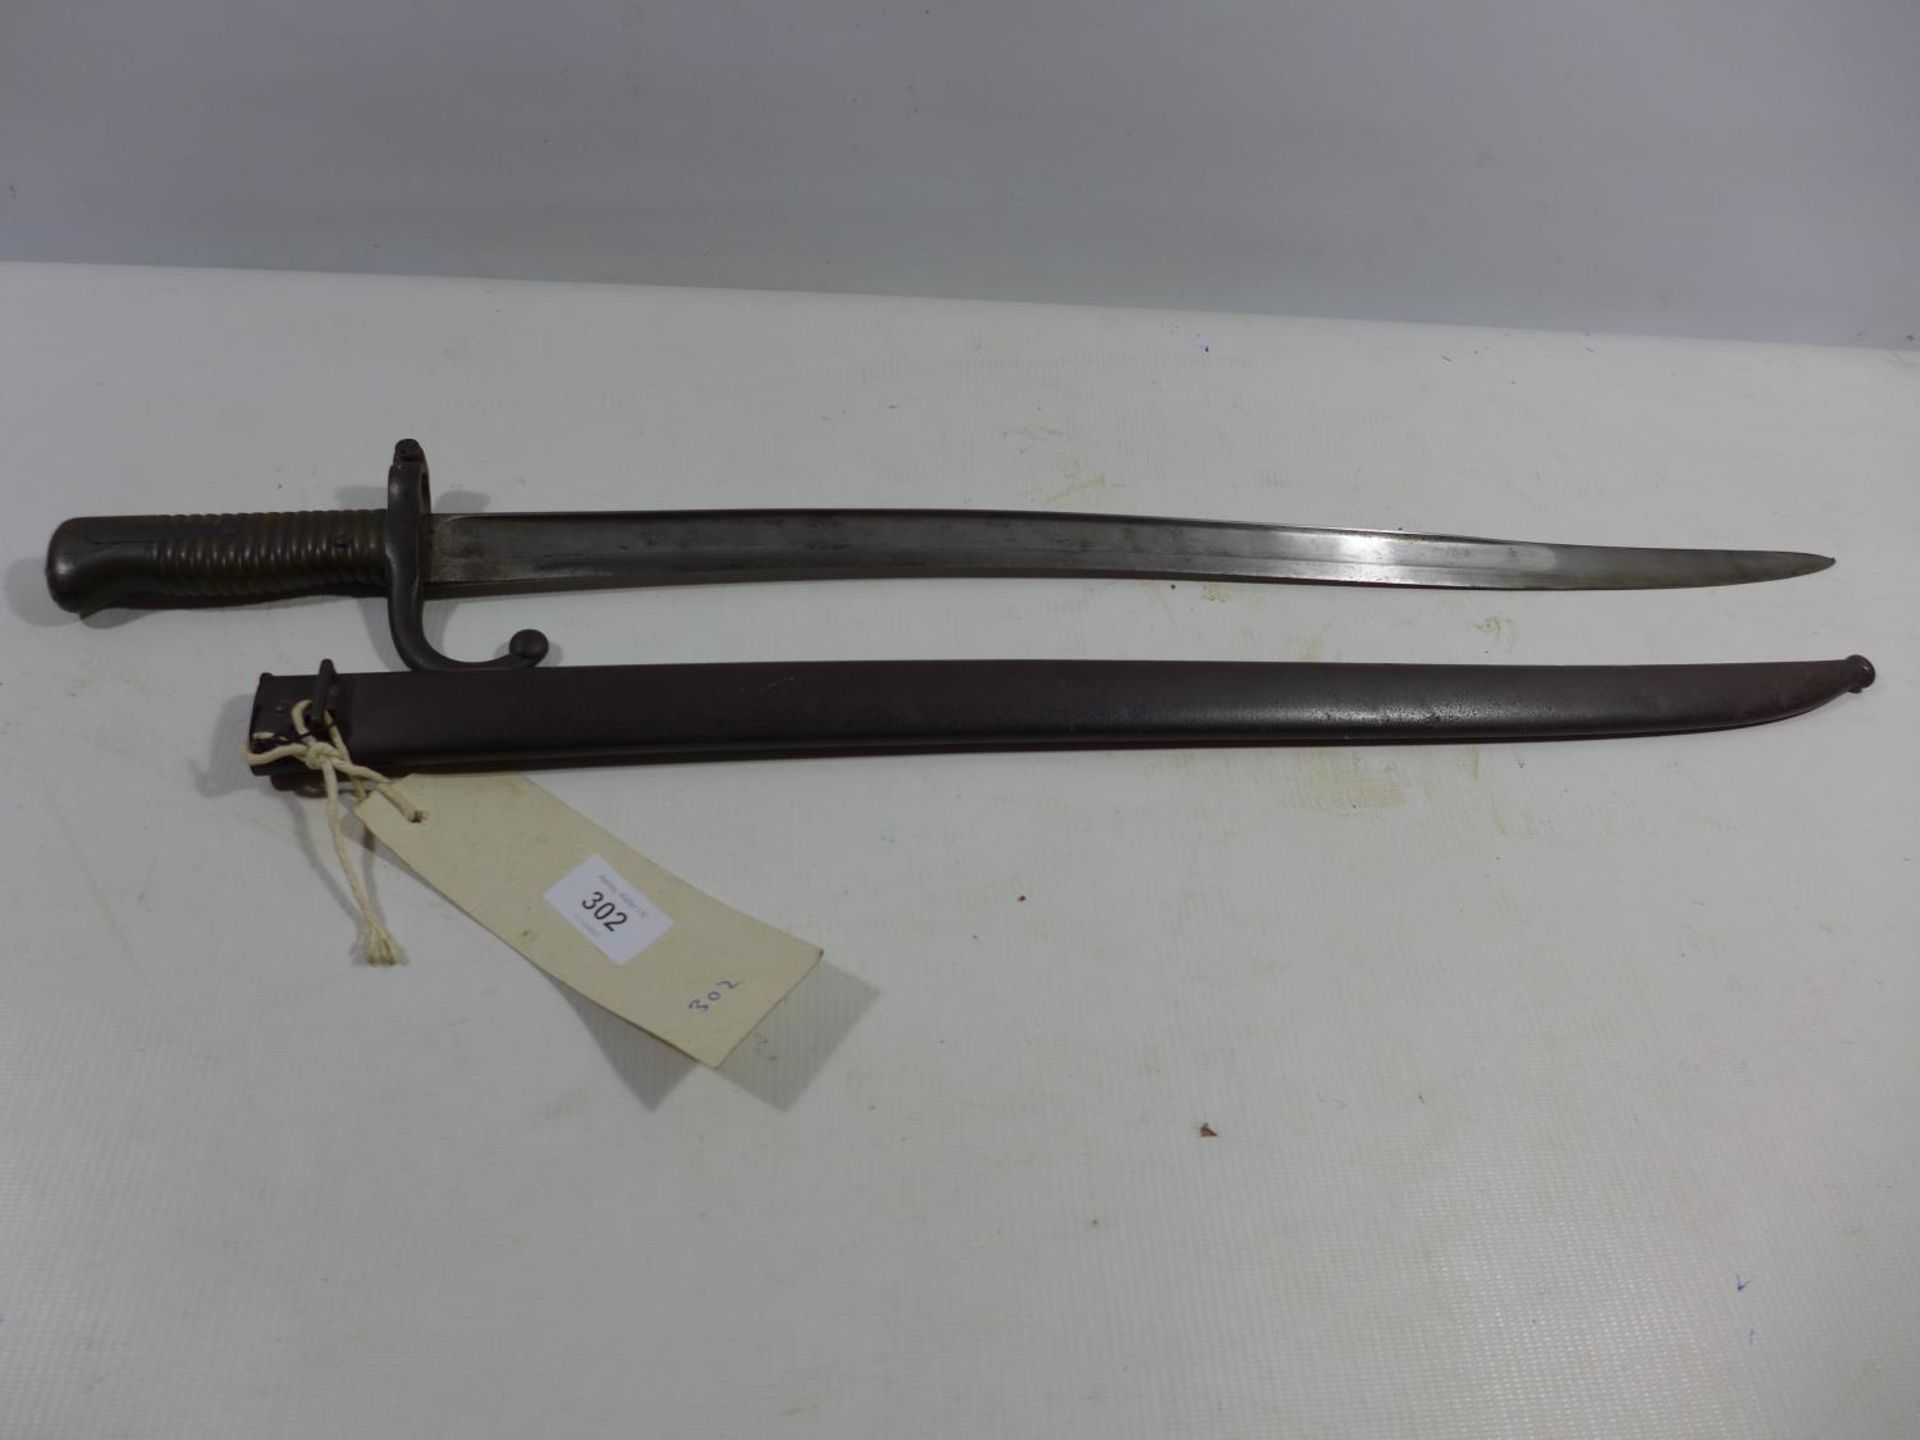 A FRENCH CHASSEPOT BAYONET AND SCABBARD, 57CM BLADE DATED 1870